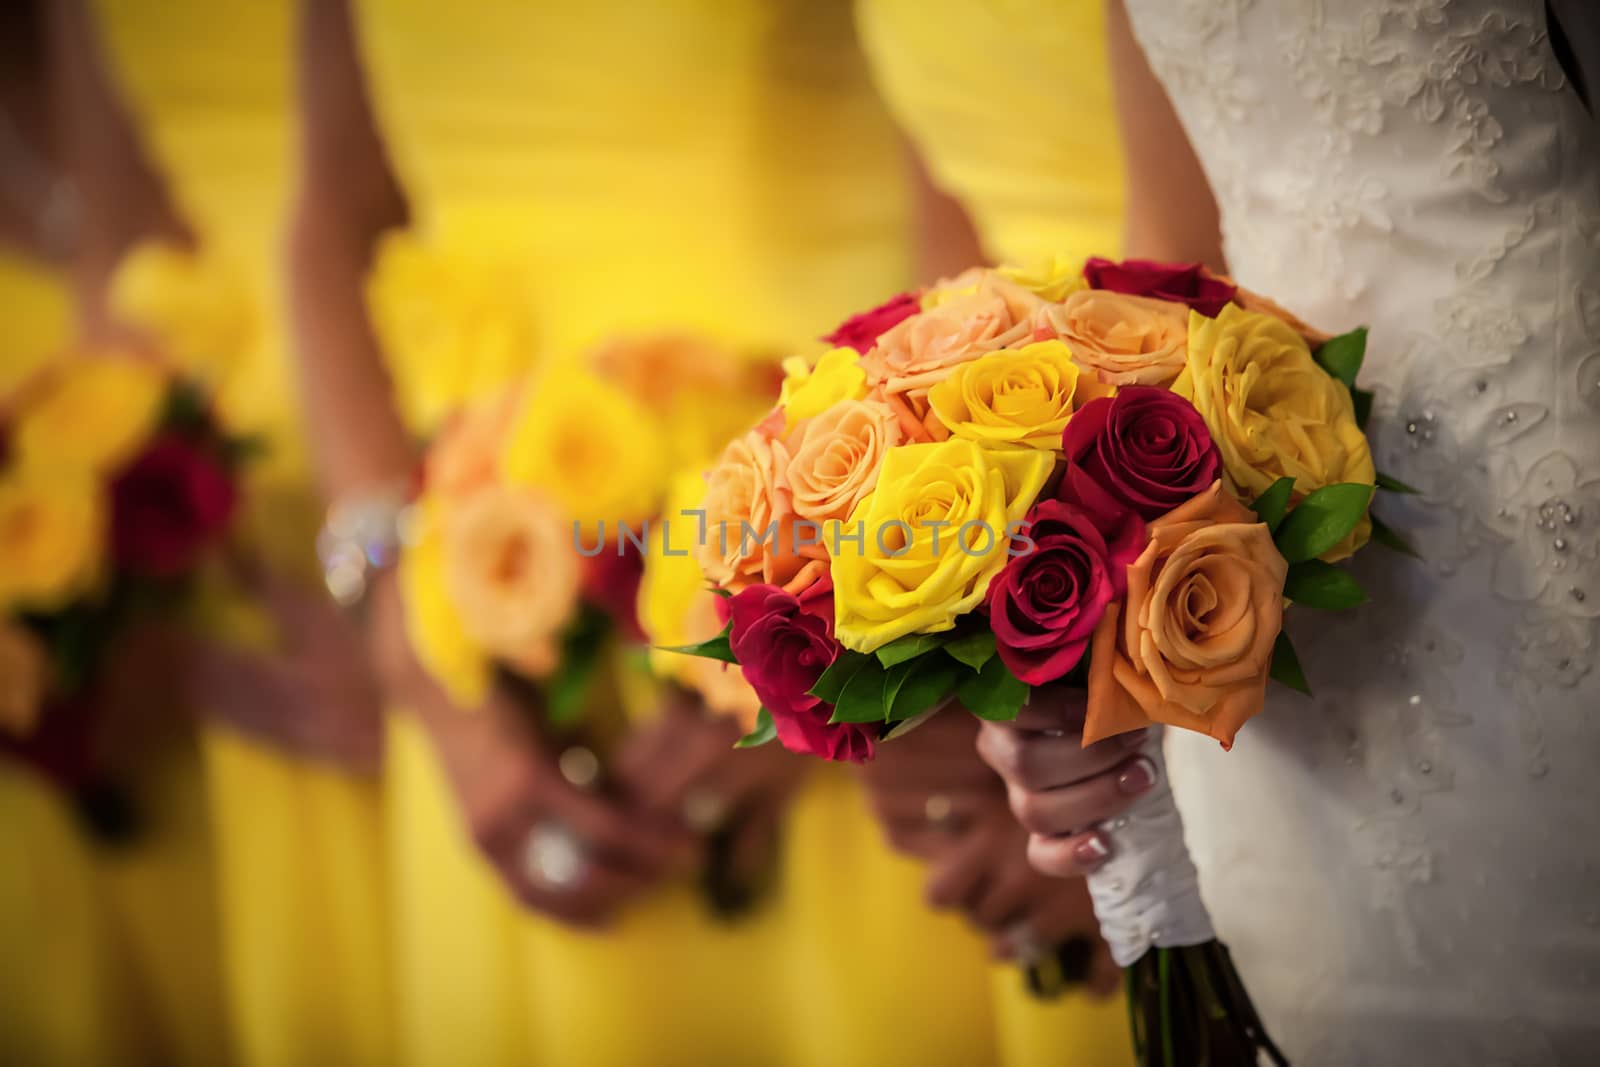 Beautiful bride holding red, yellow, orange bouquet with bridesmaids in the background.